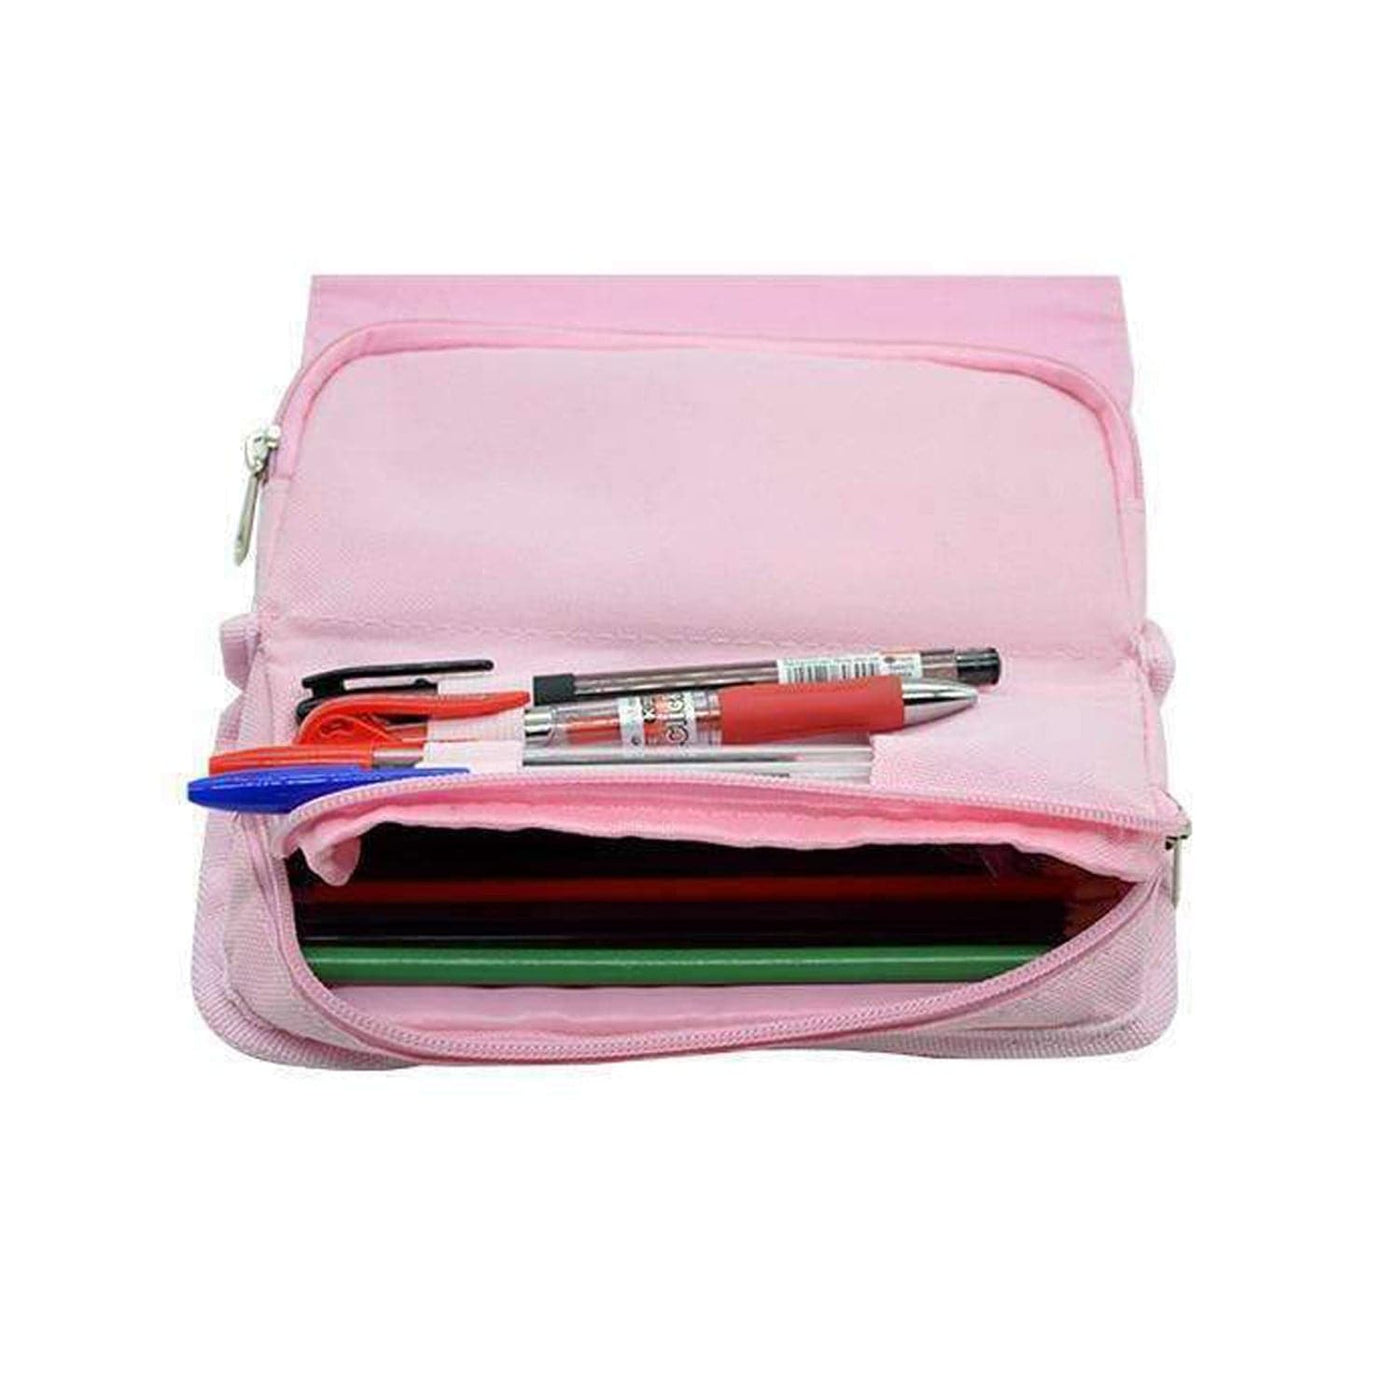 Her - Chappell Roan Pencil Case